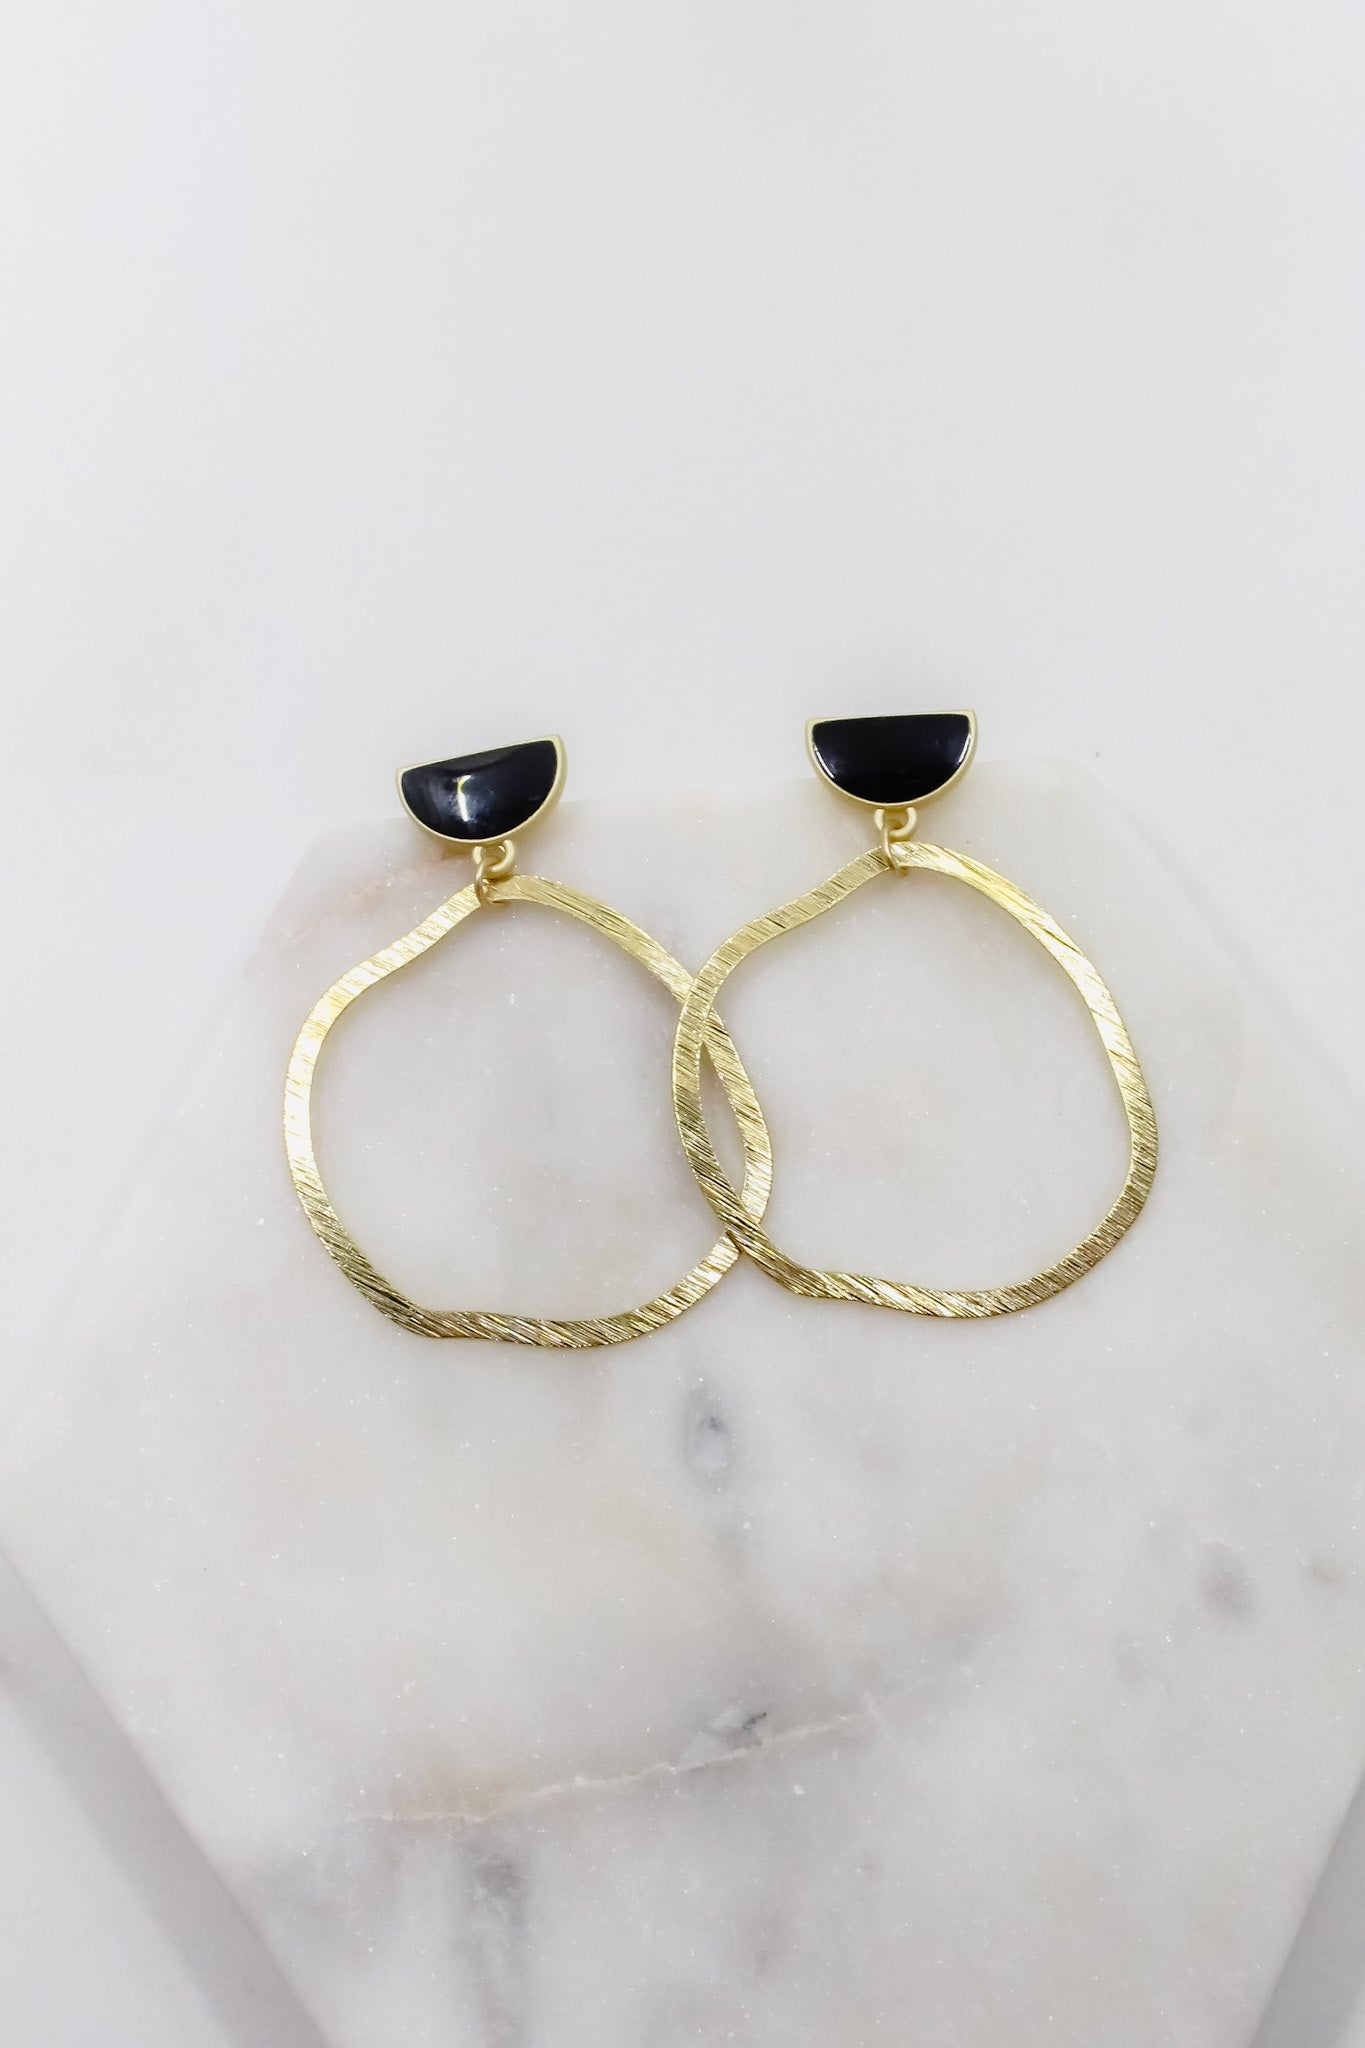 Abstract Hoop Earrings in Gold and Black